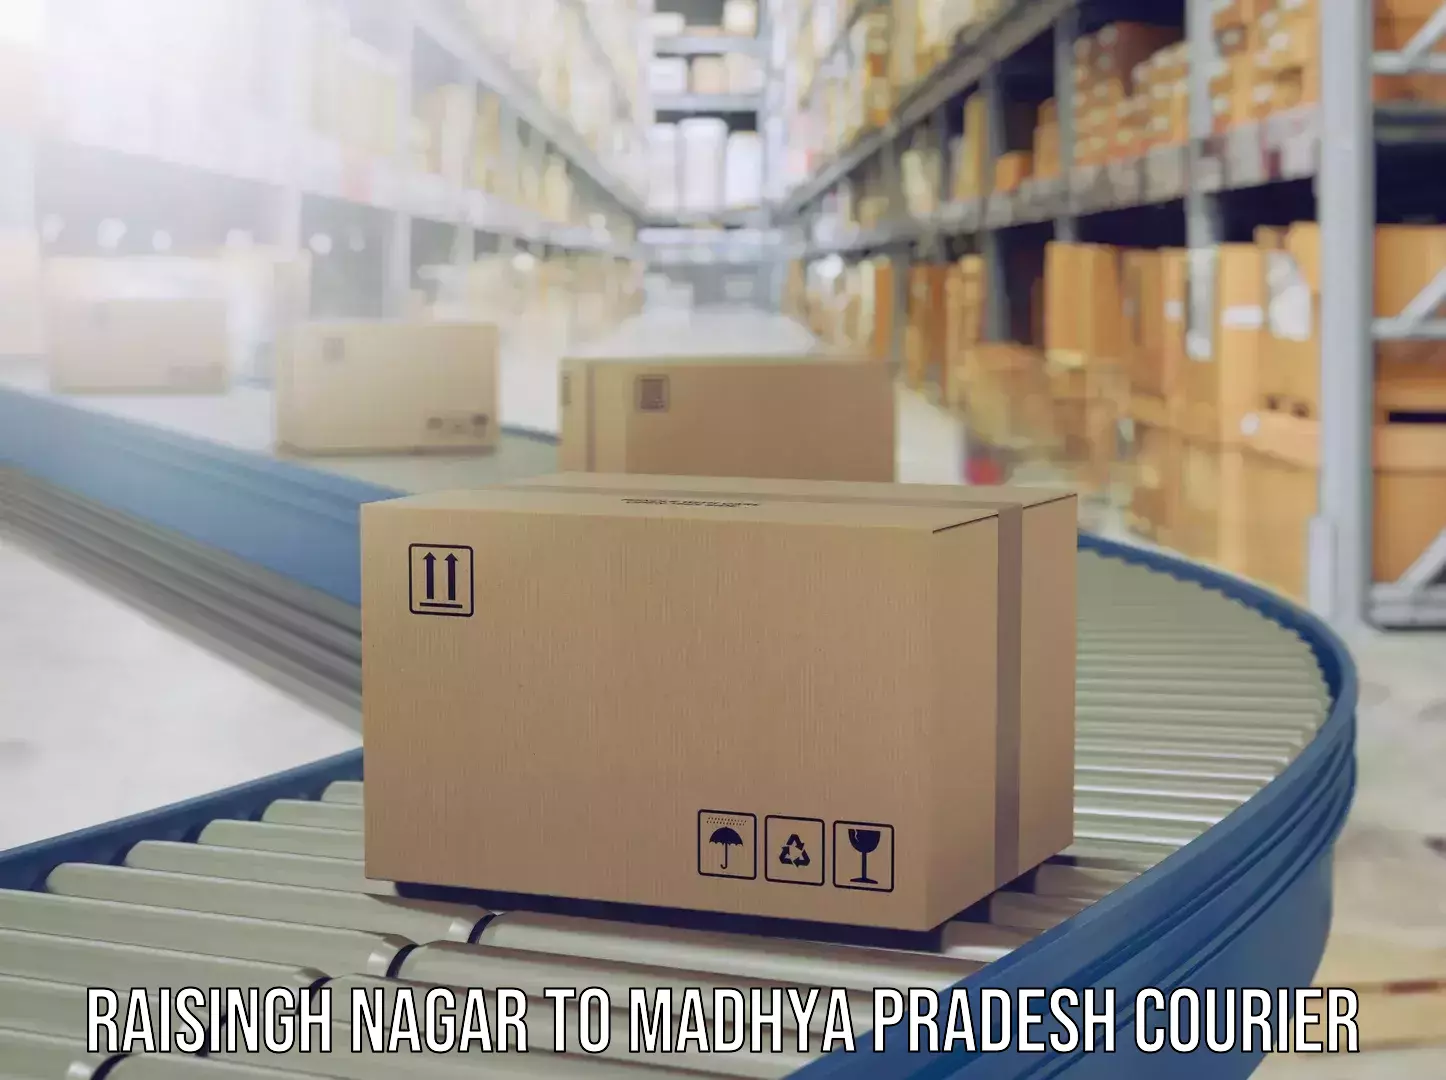 Luggage delivery system Raisingh Nagar to Indore